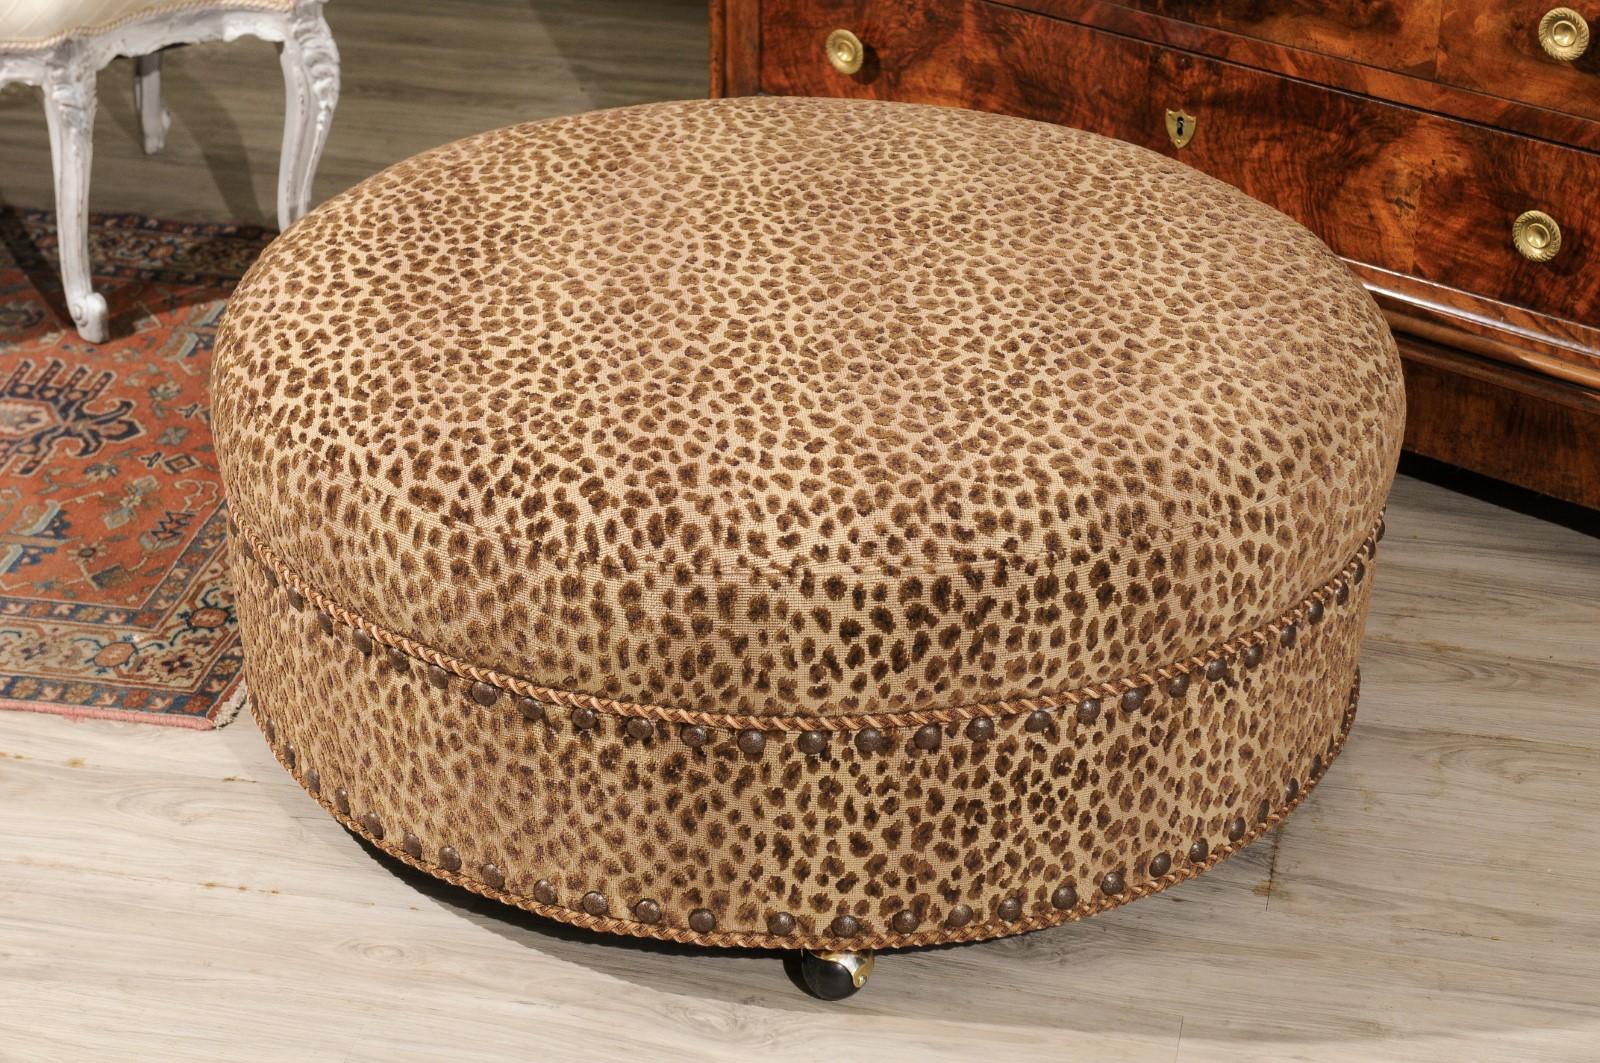 A great size ottoman to be very functional. It is a Baker piece which has recently been reupholstered in a Lee Jofa animal print fabric.
Braid and nail heads add the perfect detailing. It stands on casters.